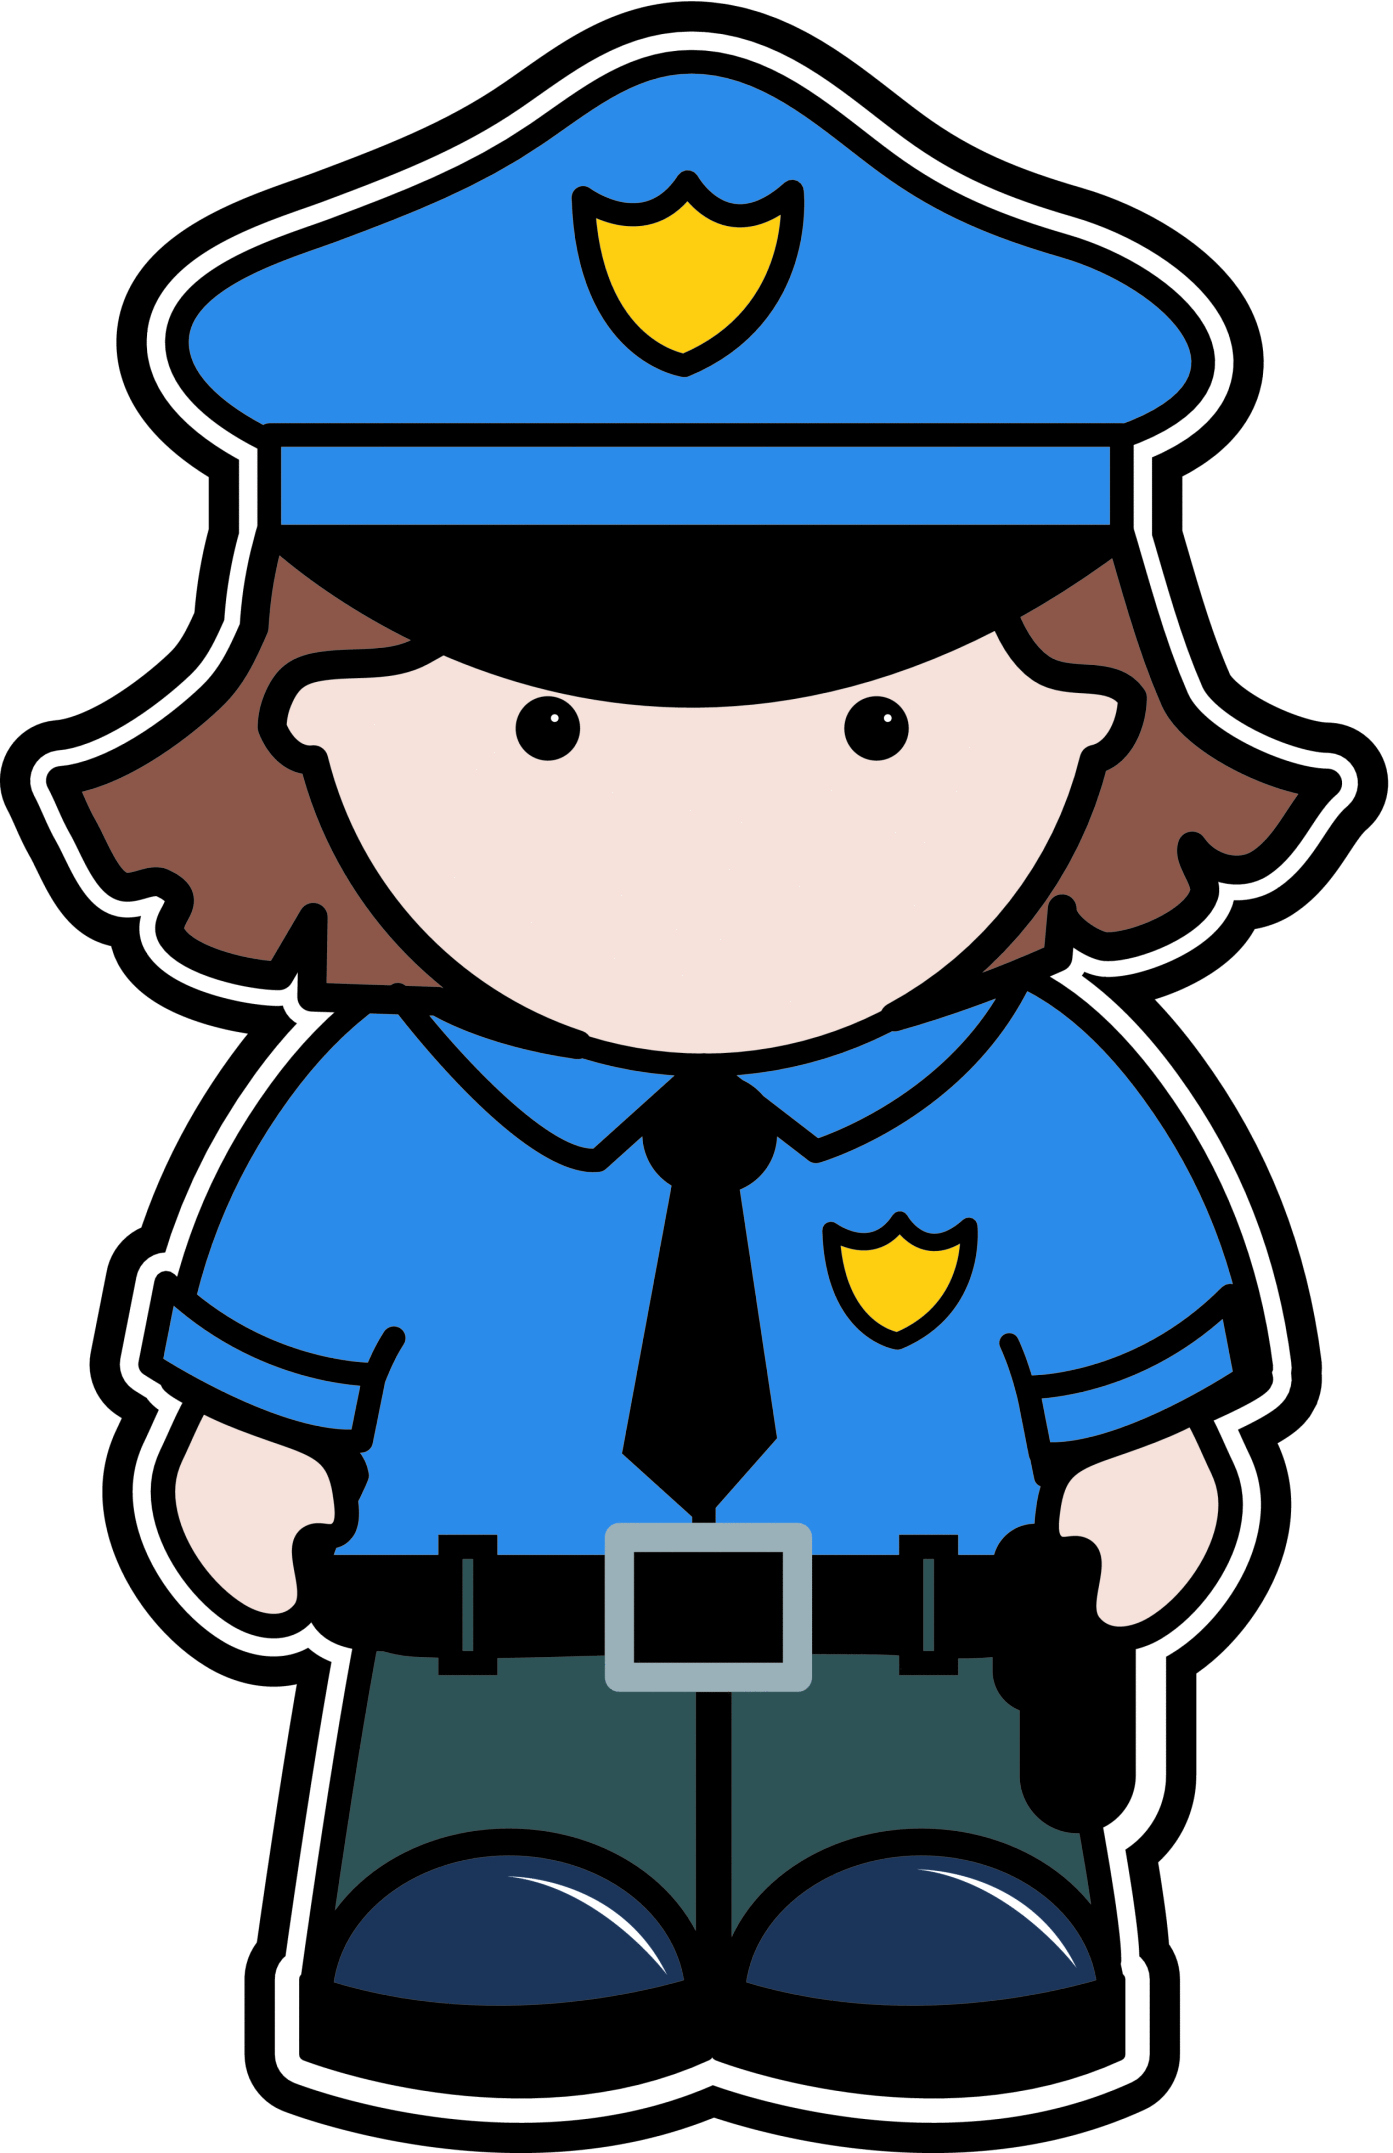 free clipart images policeman - photo #17